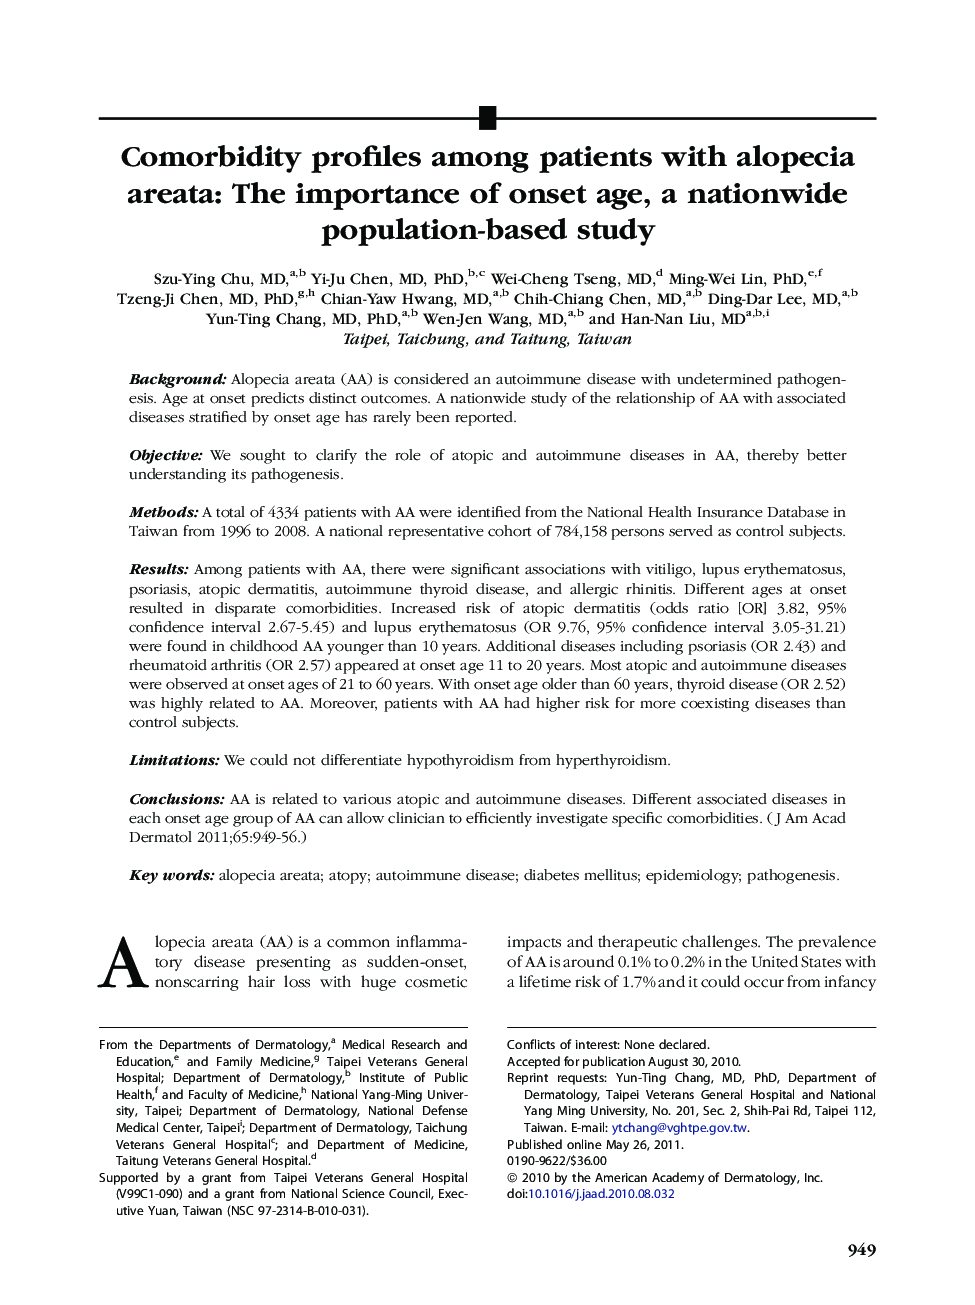 Comorbidity profiles among patients with alopecia areata: The importance of onset age, a nationwide population-based study 